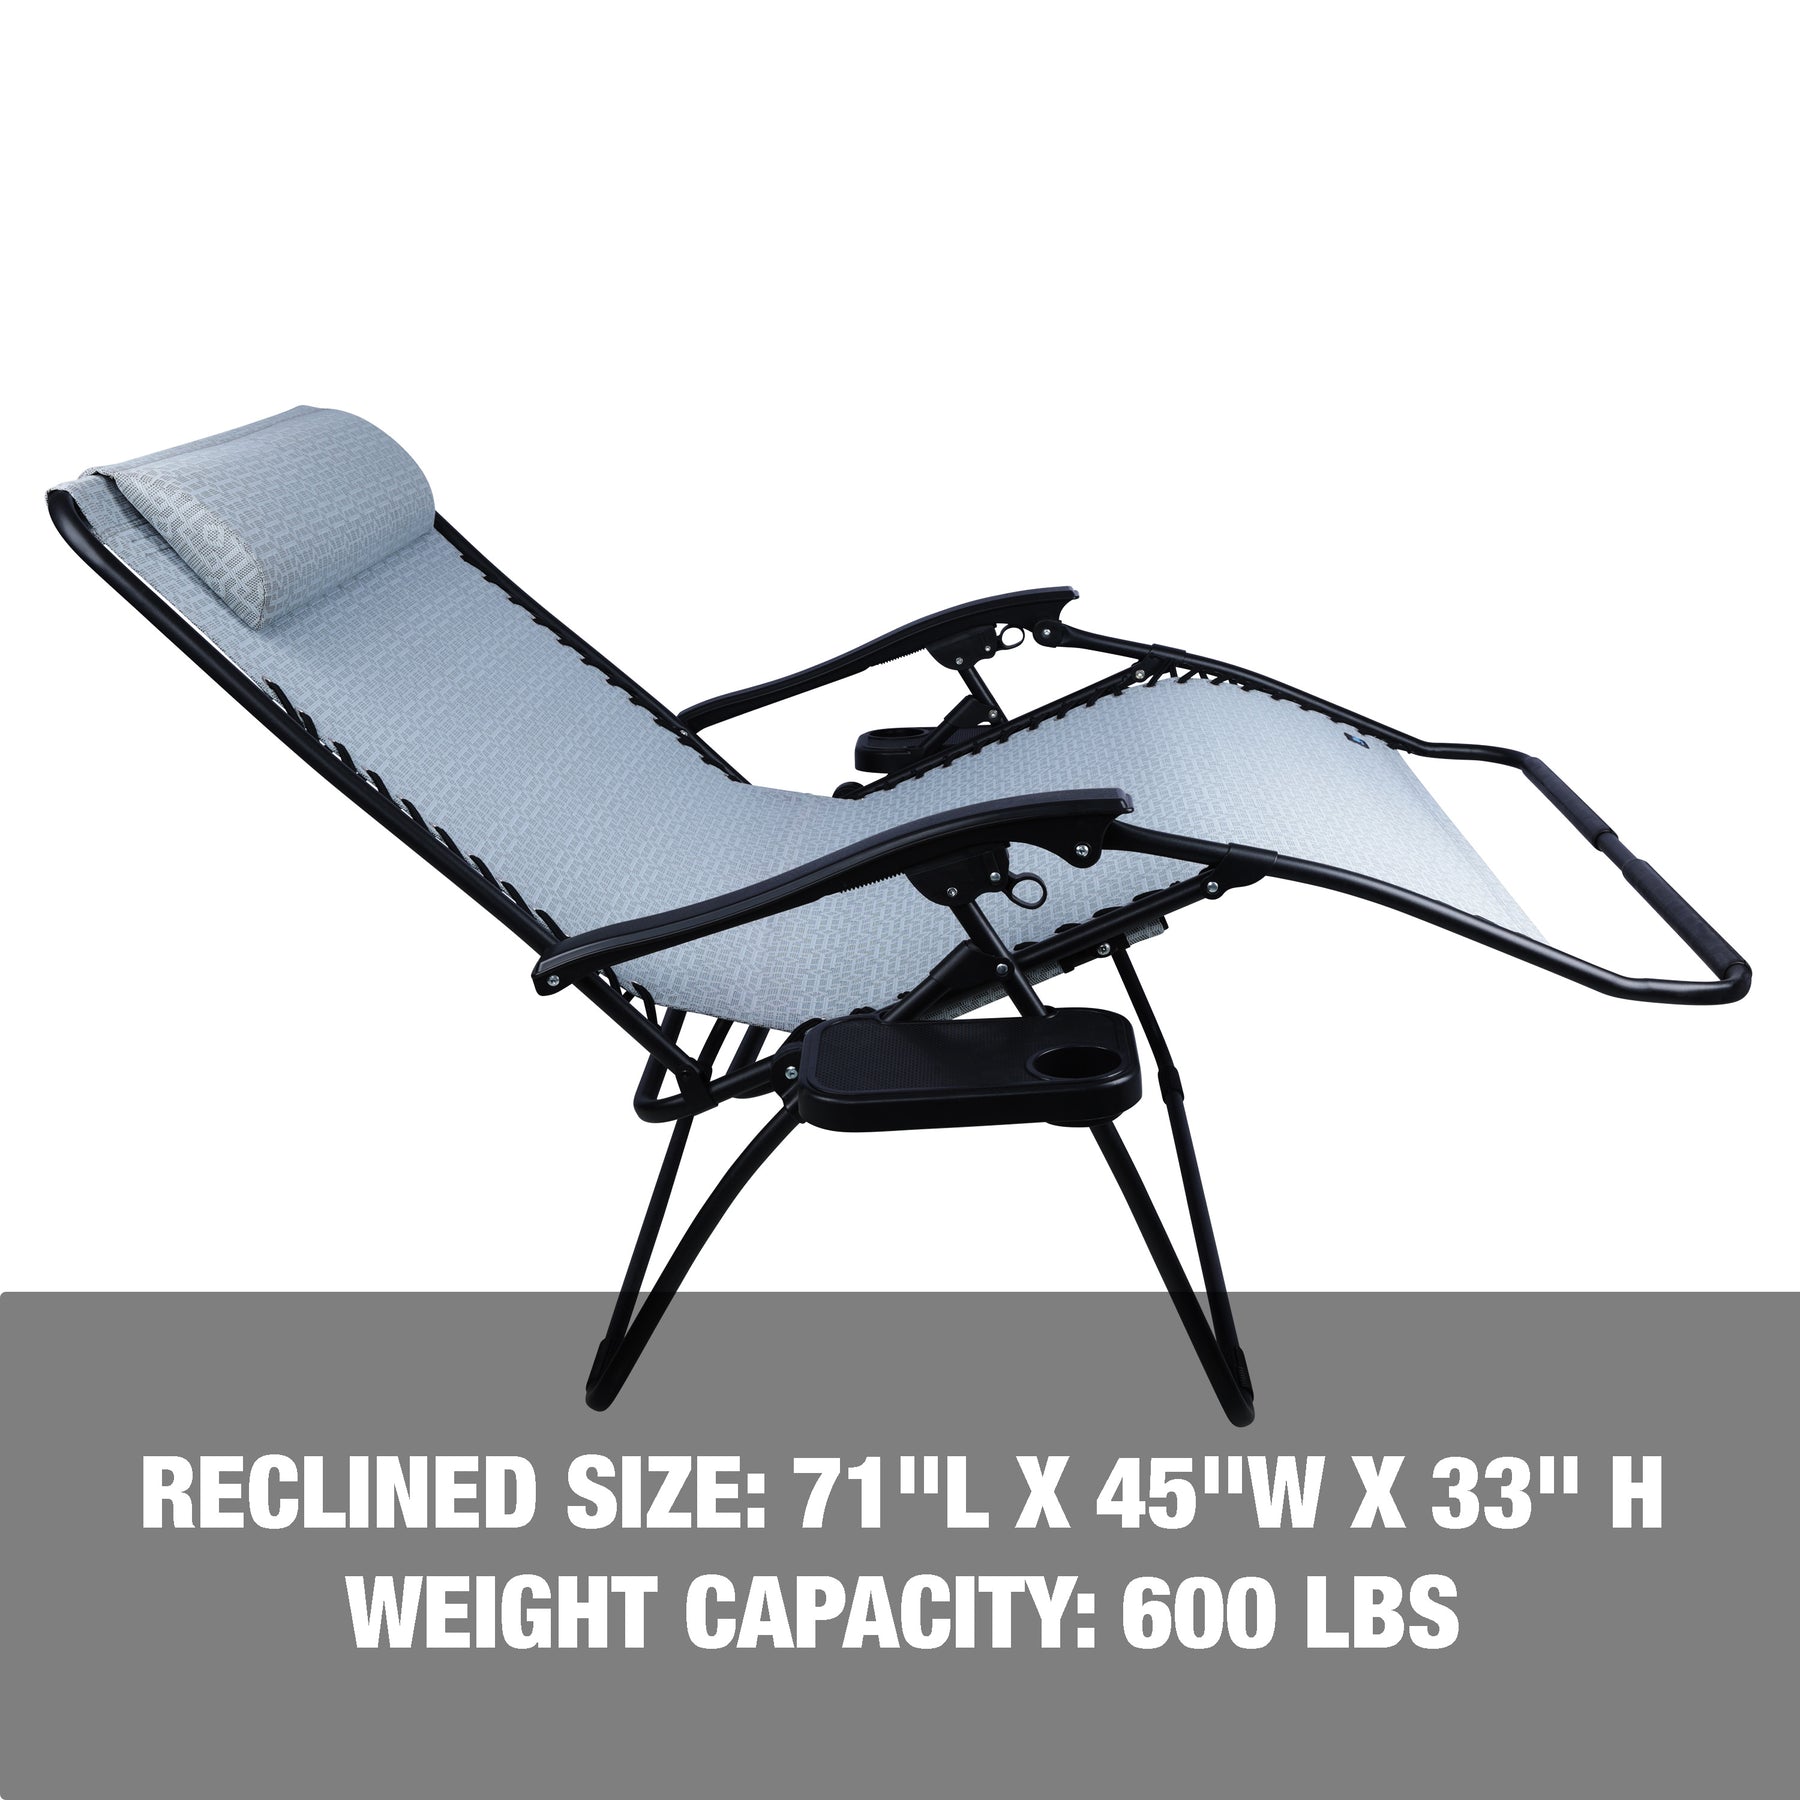 Reclined size: 71-inch length, 45-inch width, and 33-inch height, with a weight capacity of 600 pounds.